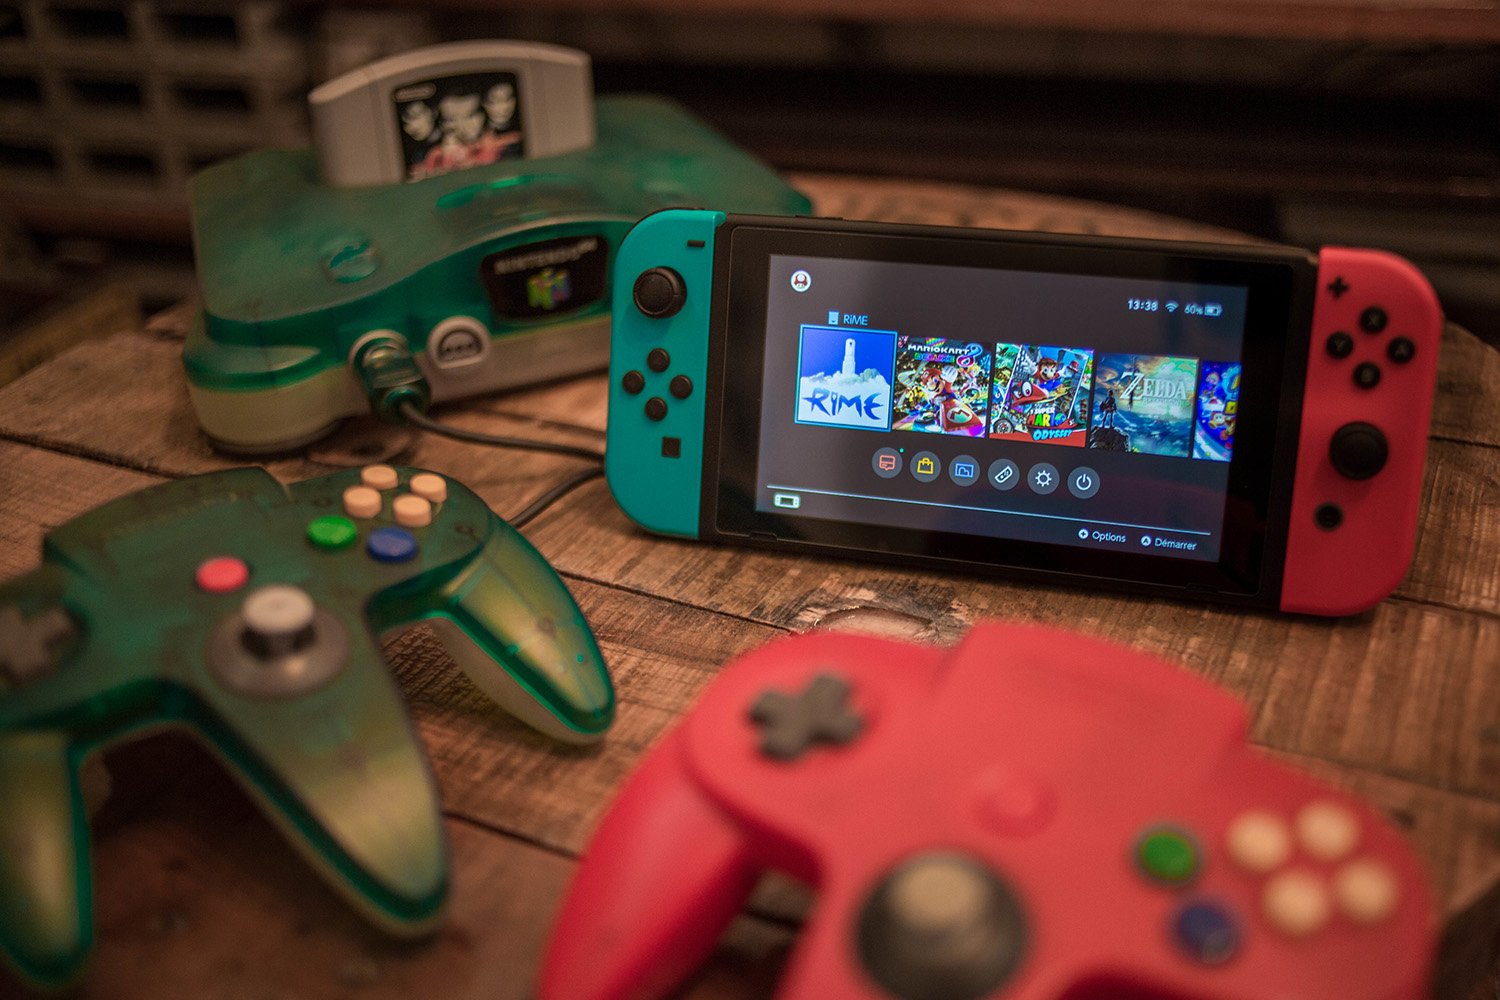 A blue Nintendo 64 console and its controllers beside a Nintendo Switch console and its Joy-Cons